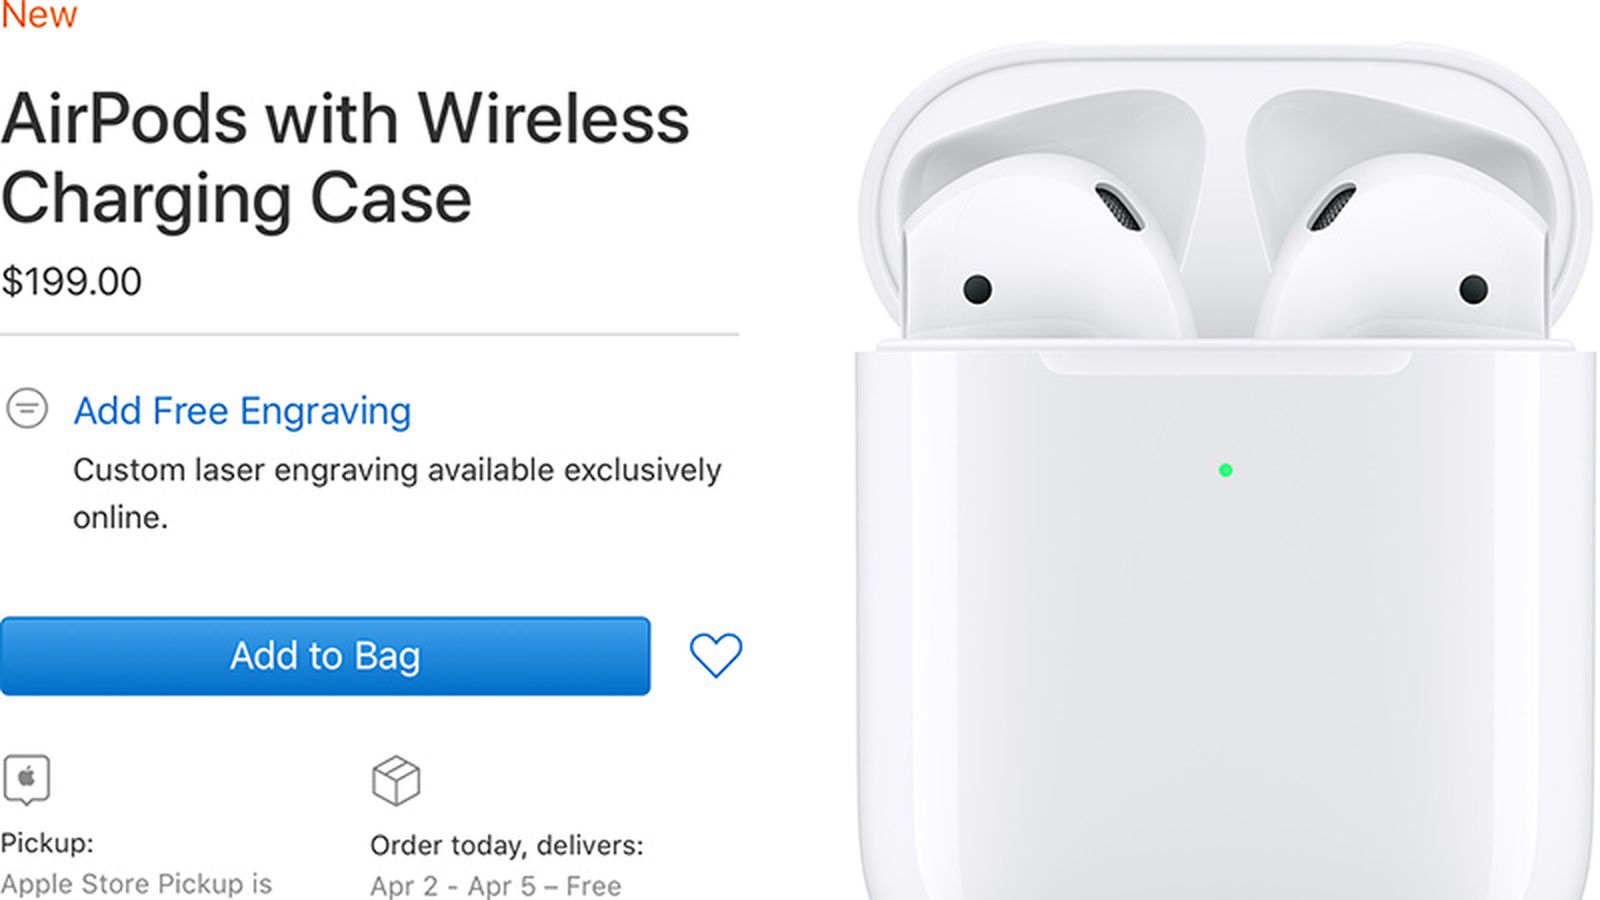 AirPods With Wireless Charging Delivery Date Slips to April - MacRumors